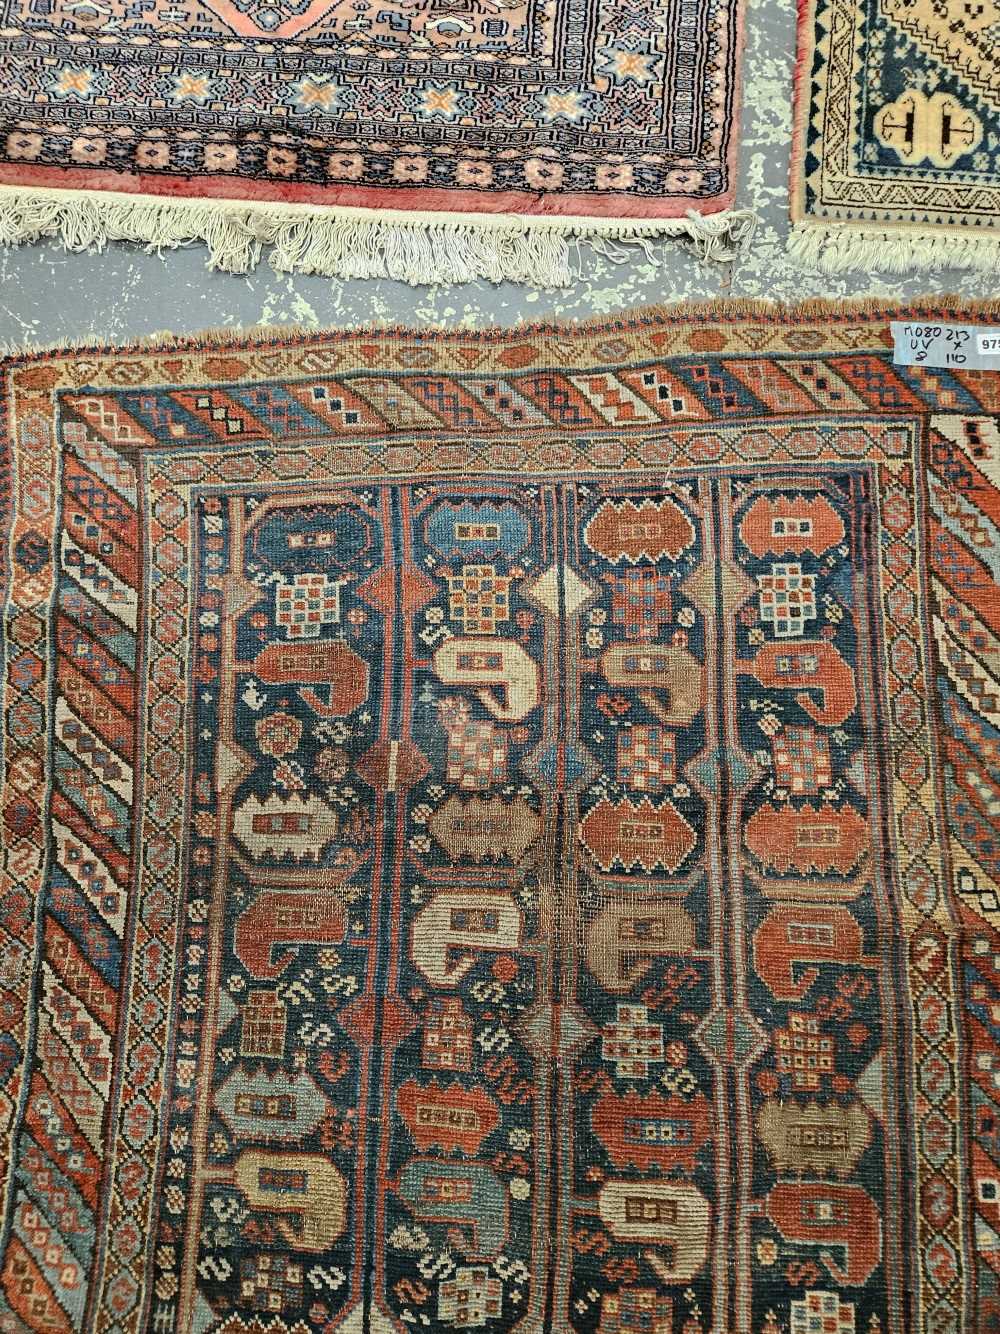 AN ANTIQUE PERSIAN TRIBAL RUG 213 x 110 cm. - Image 5 of 5